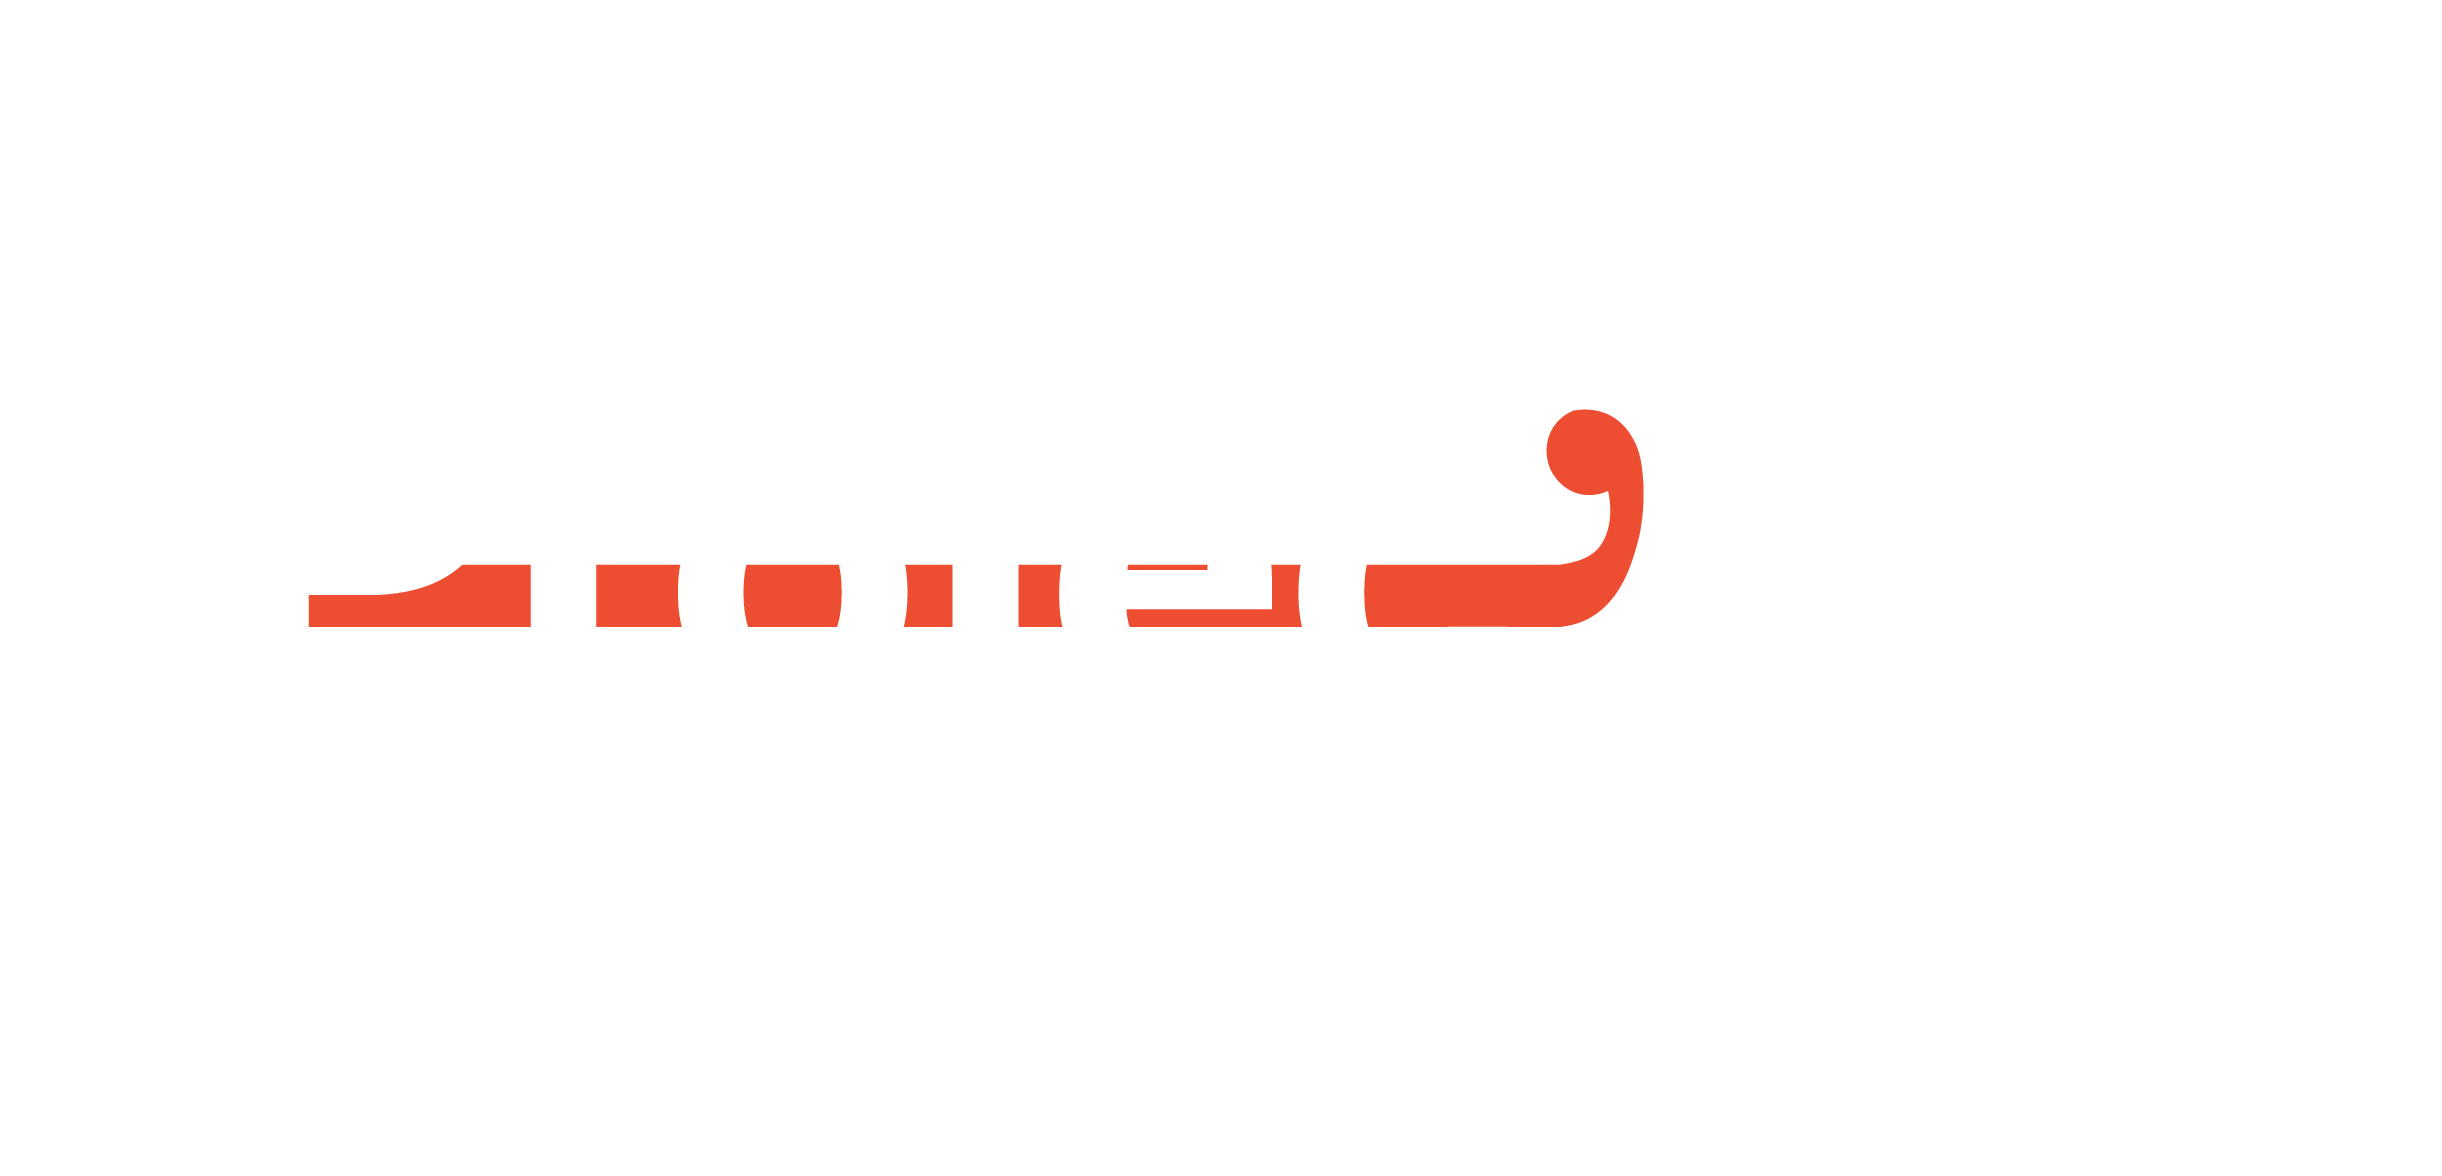 Projectoi